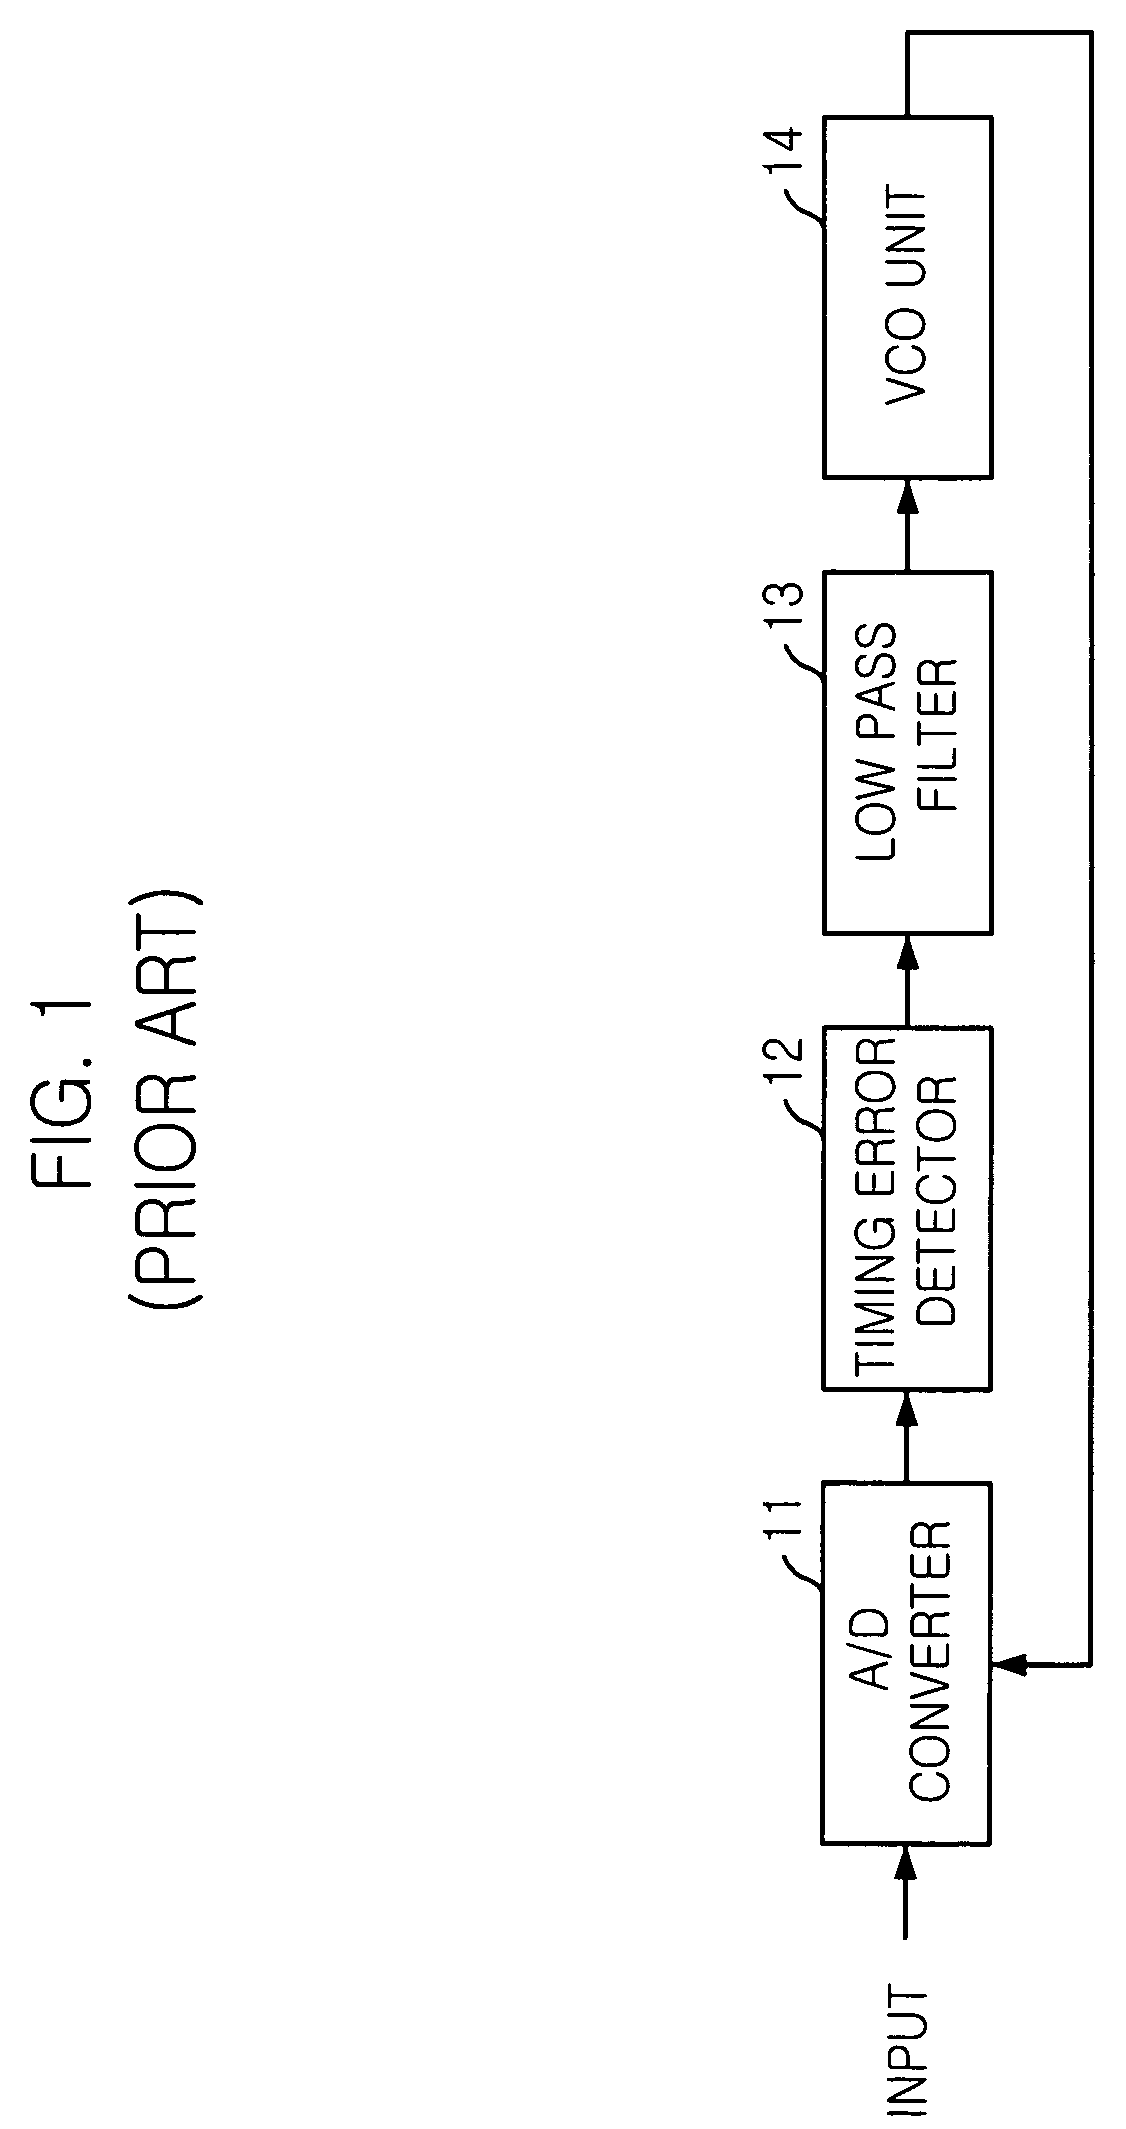 Apparatus and method for synchronizing symbol timing using timing loop controller